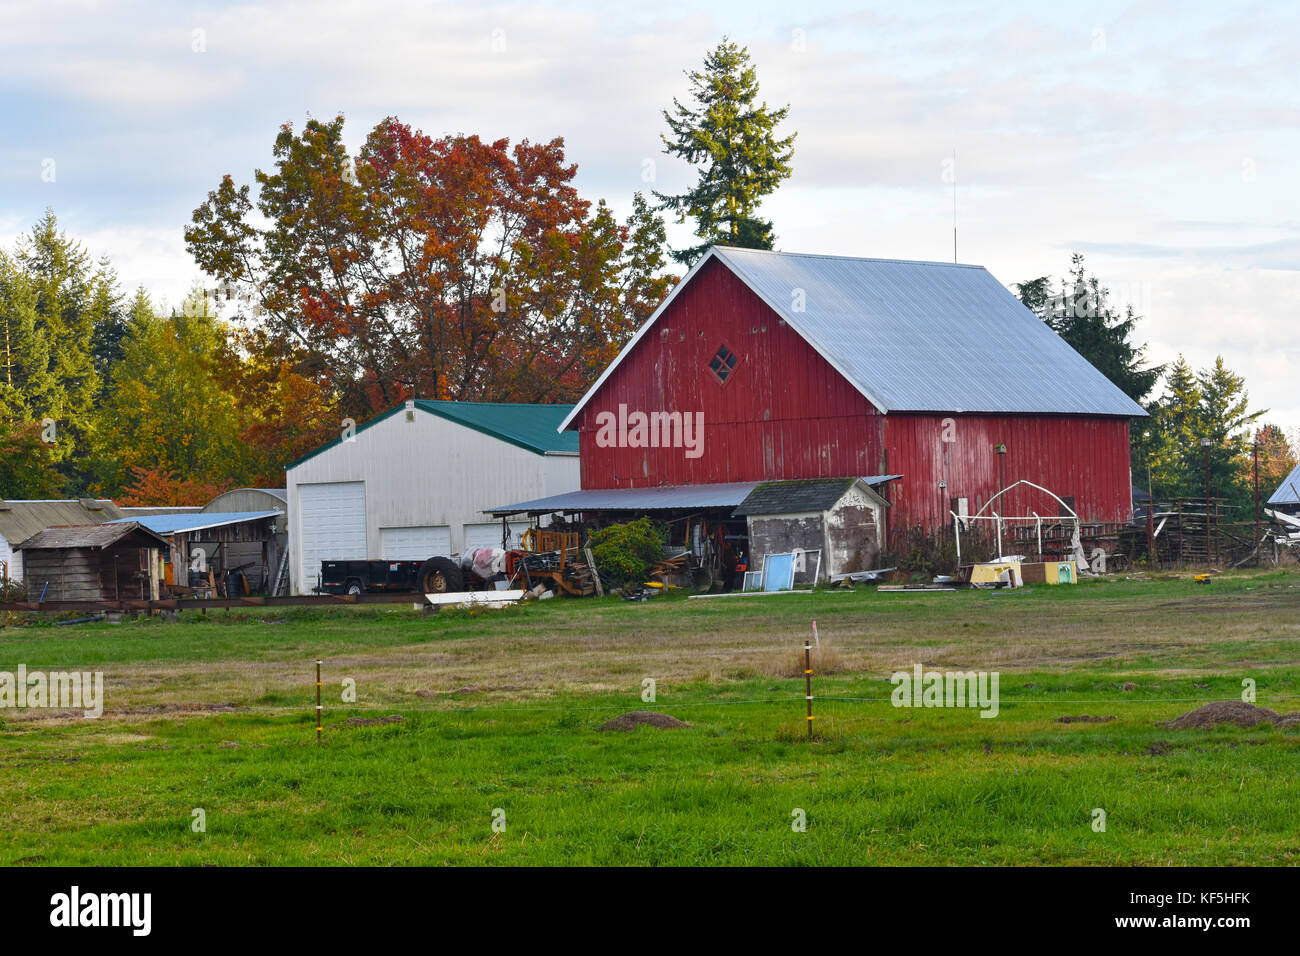 A red barn with lots of junk in front, farm equipment, an electric fence.  Mole holes are in the foreground in this autumn scene. Stock Photo